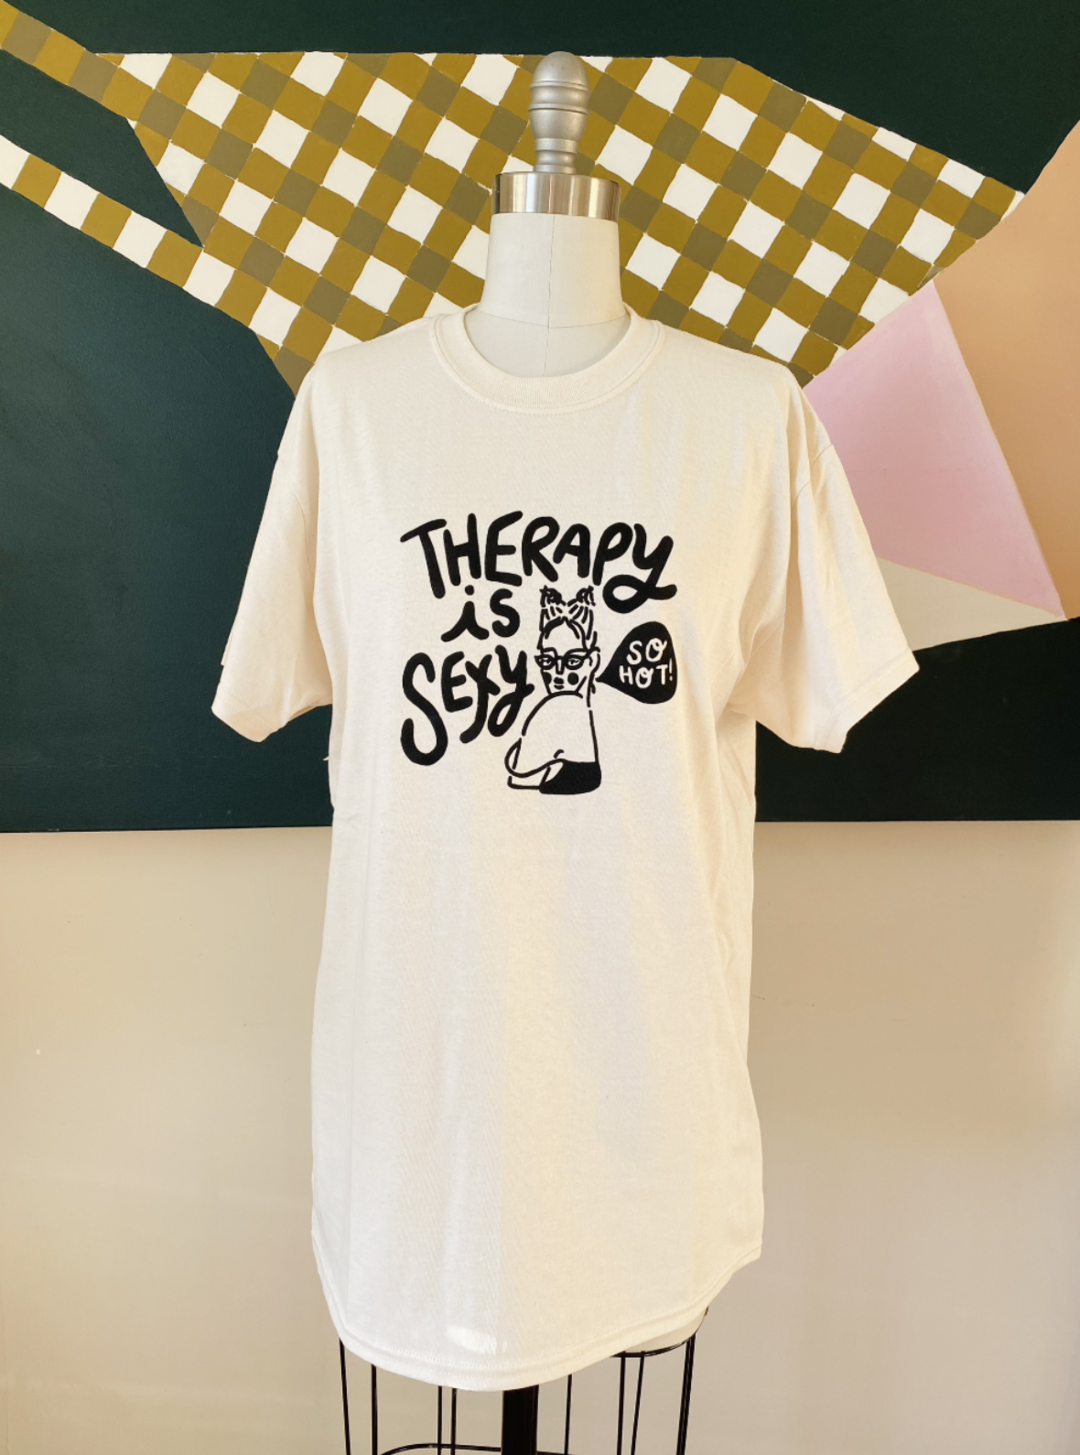 Therapy T-Shirt